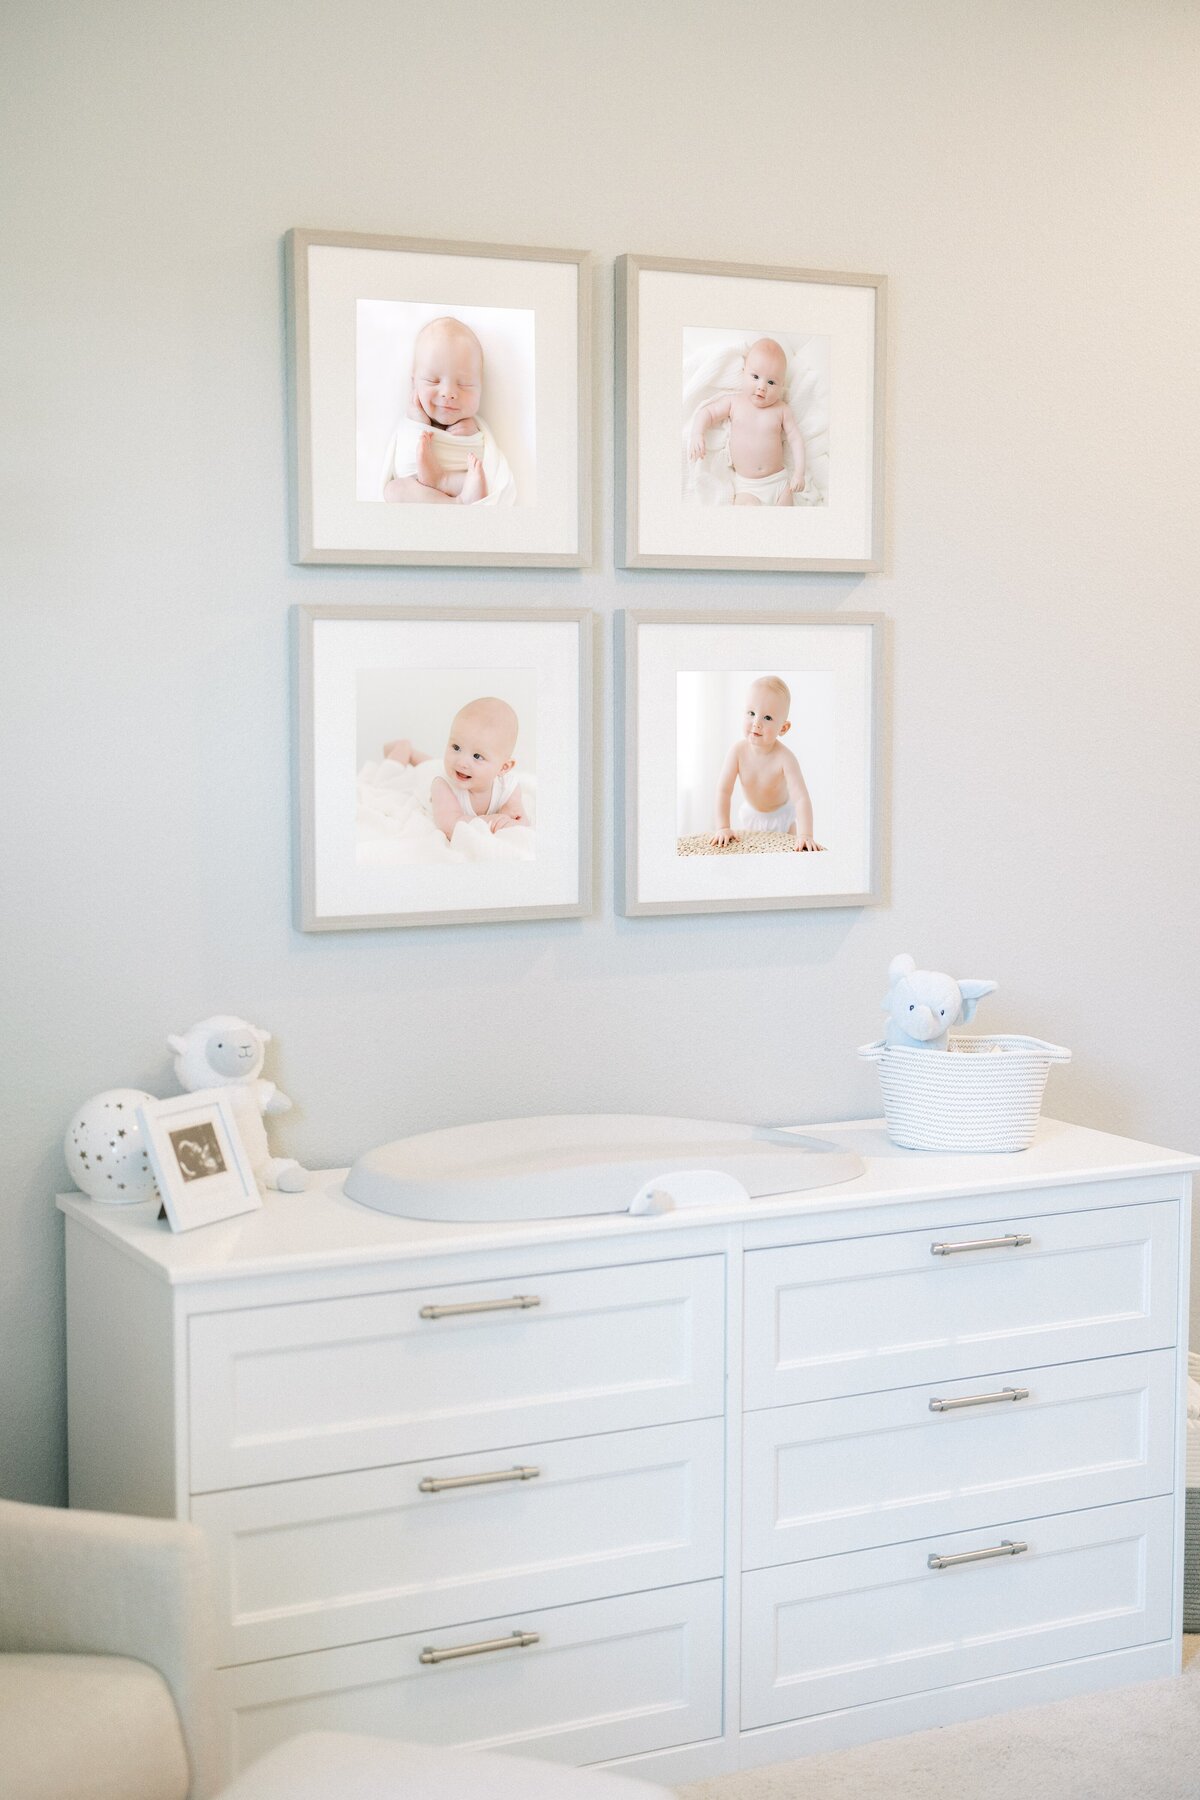 framed wall gallery in baby nursery with image of newborn 3 months 6 months 9 months and one year